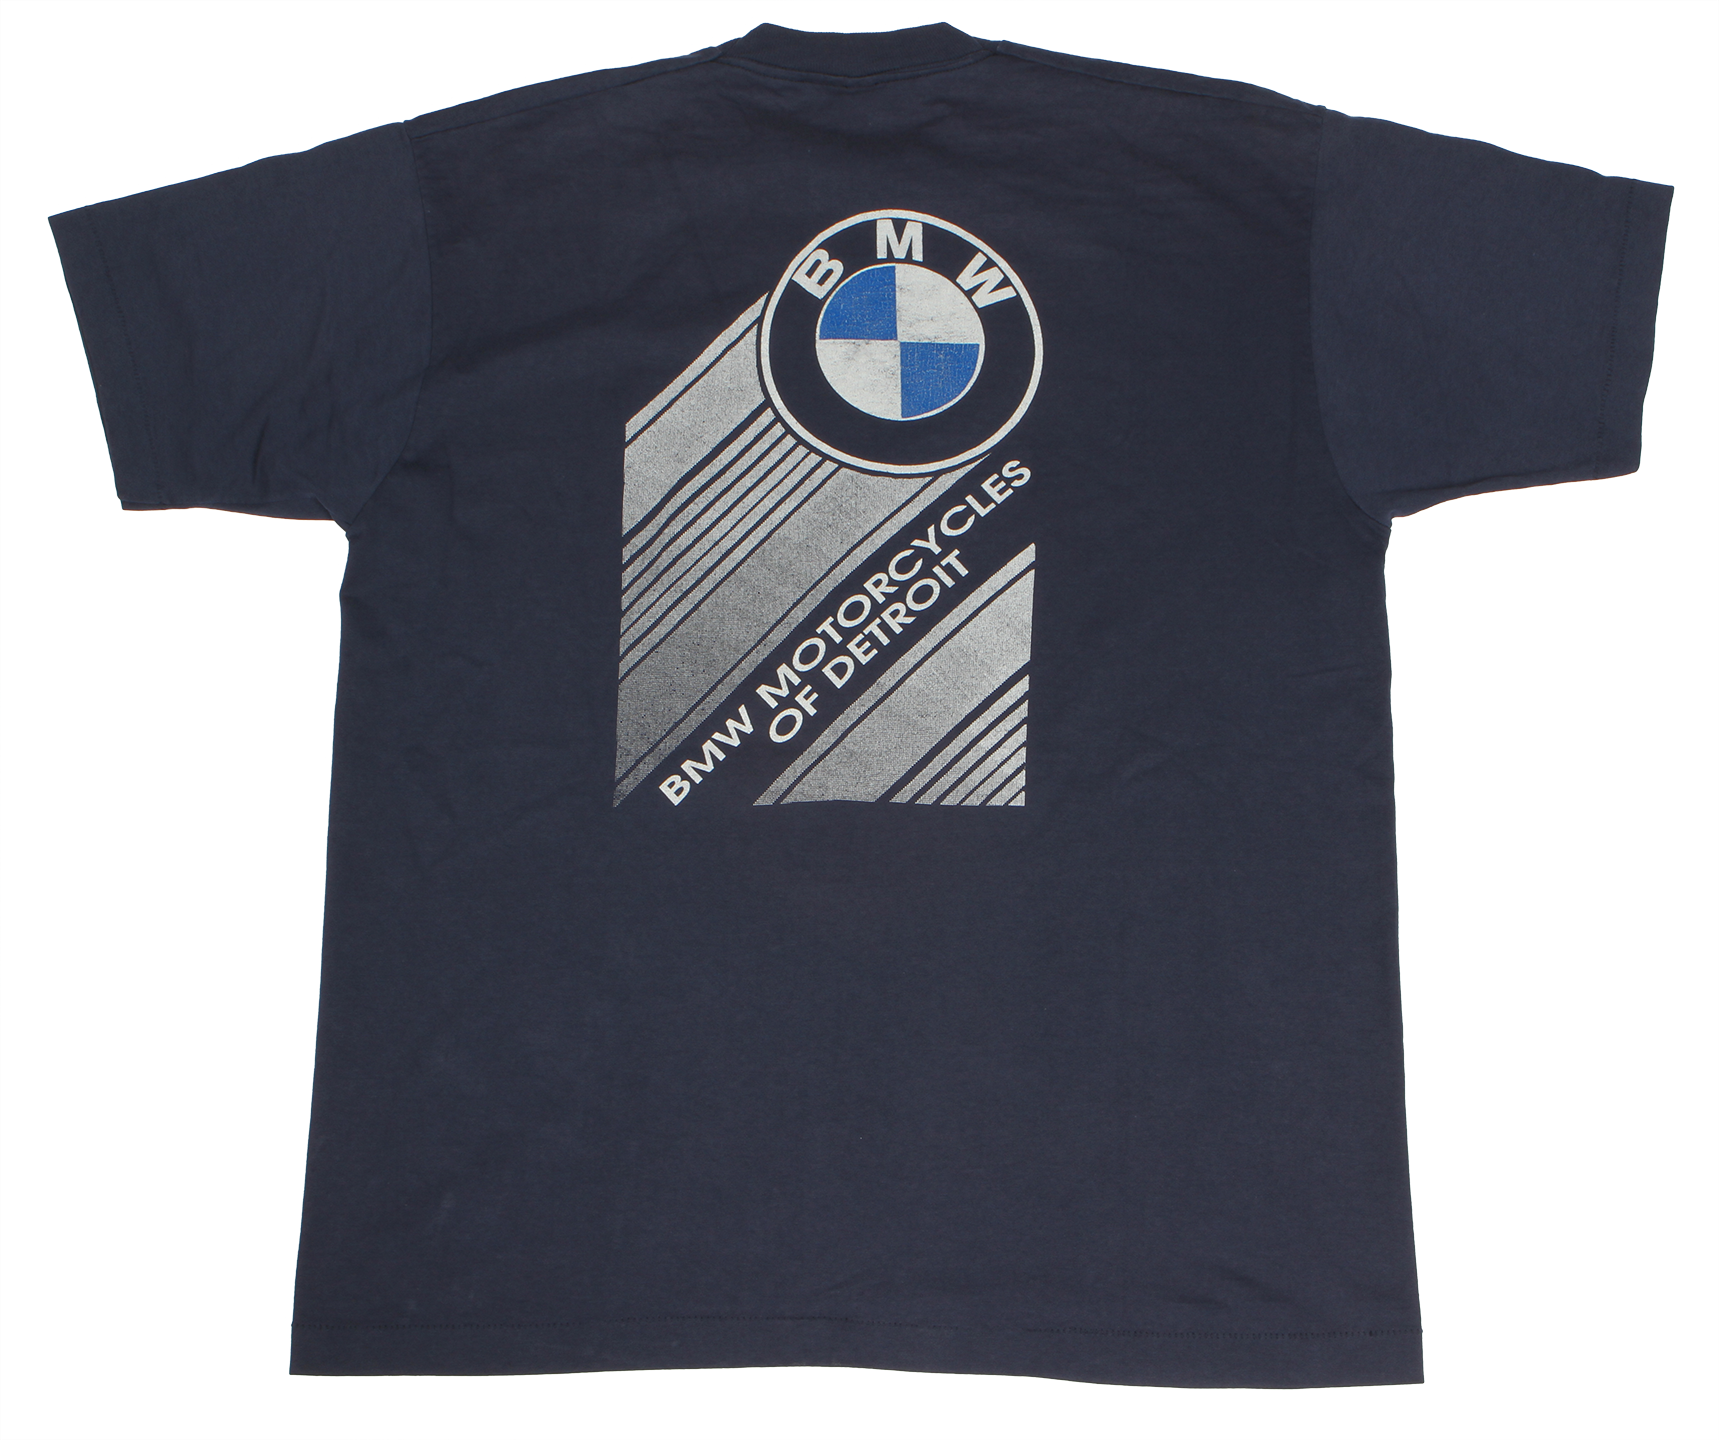 BMW Motorcycles of Detroit T-Shirt